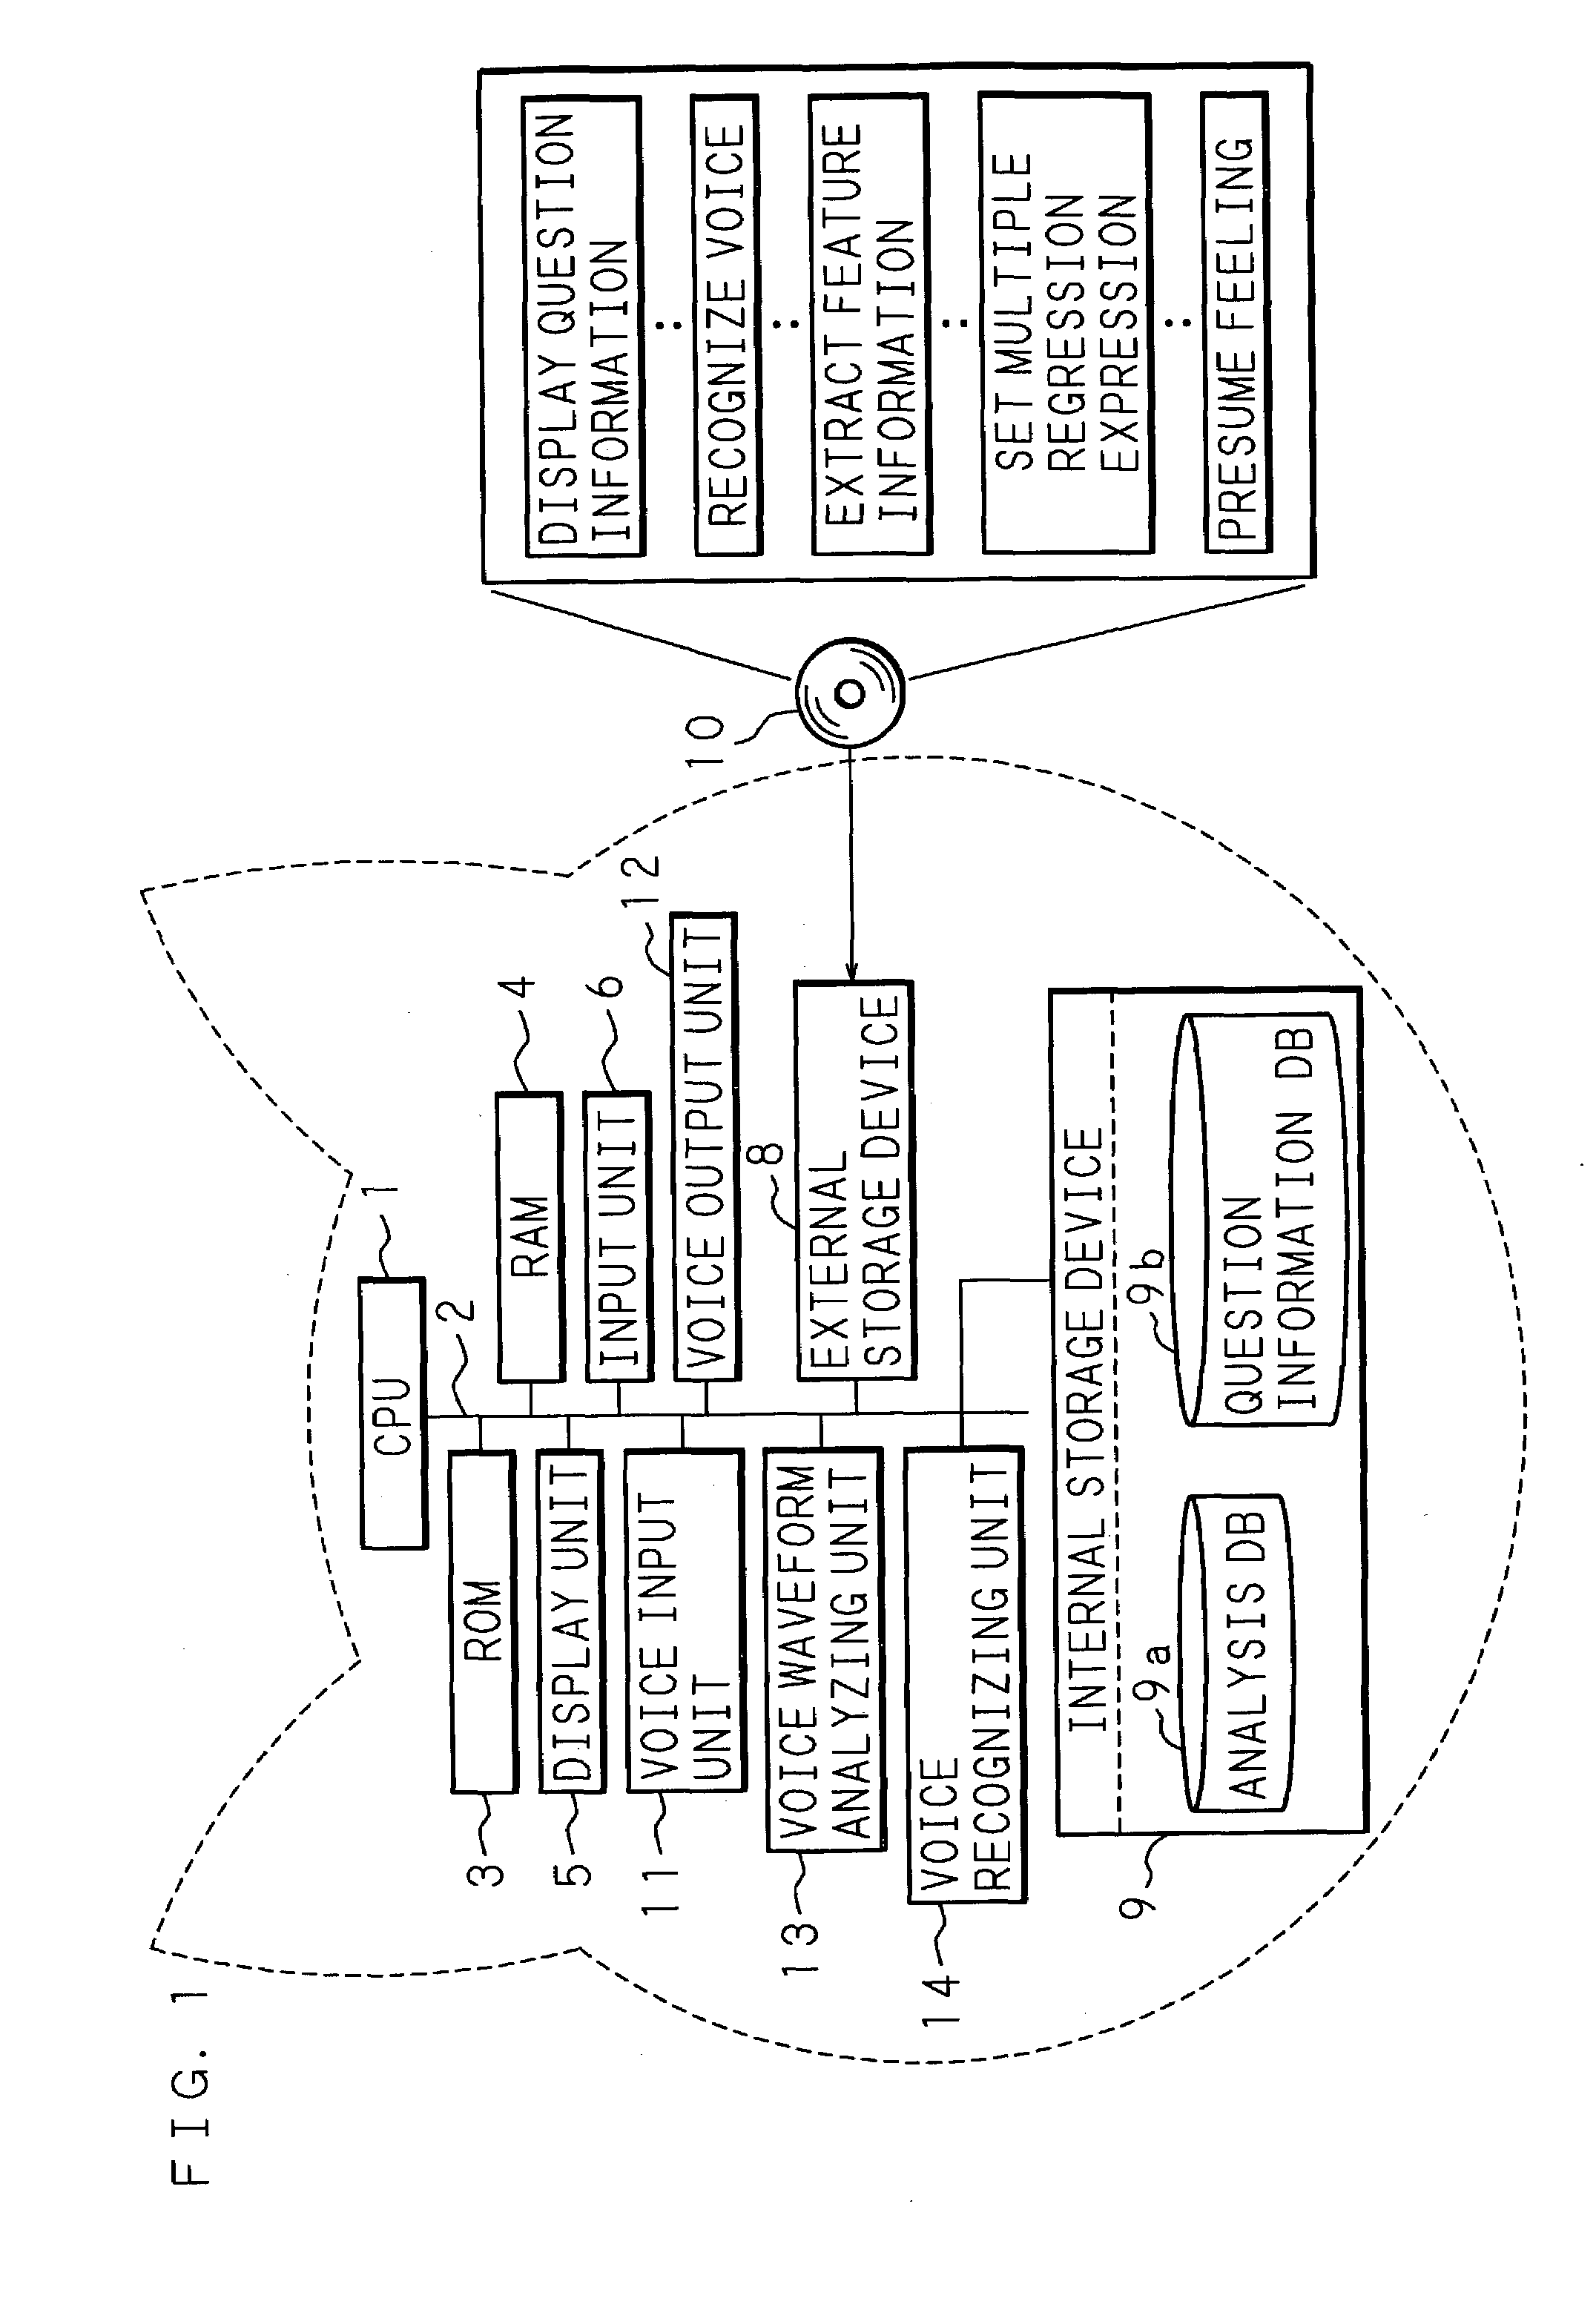 System and method for health care information processing based on acoustic features